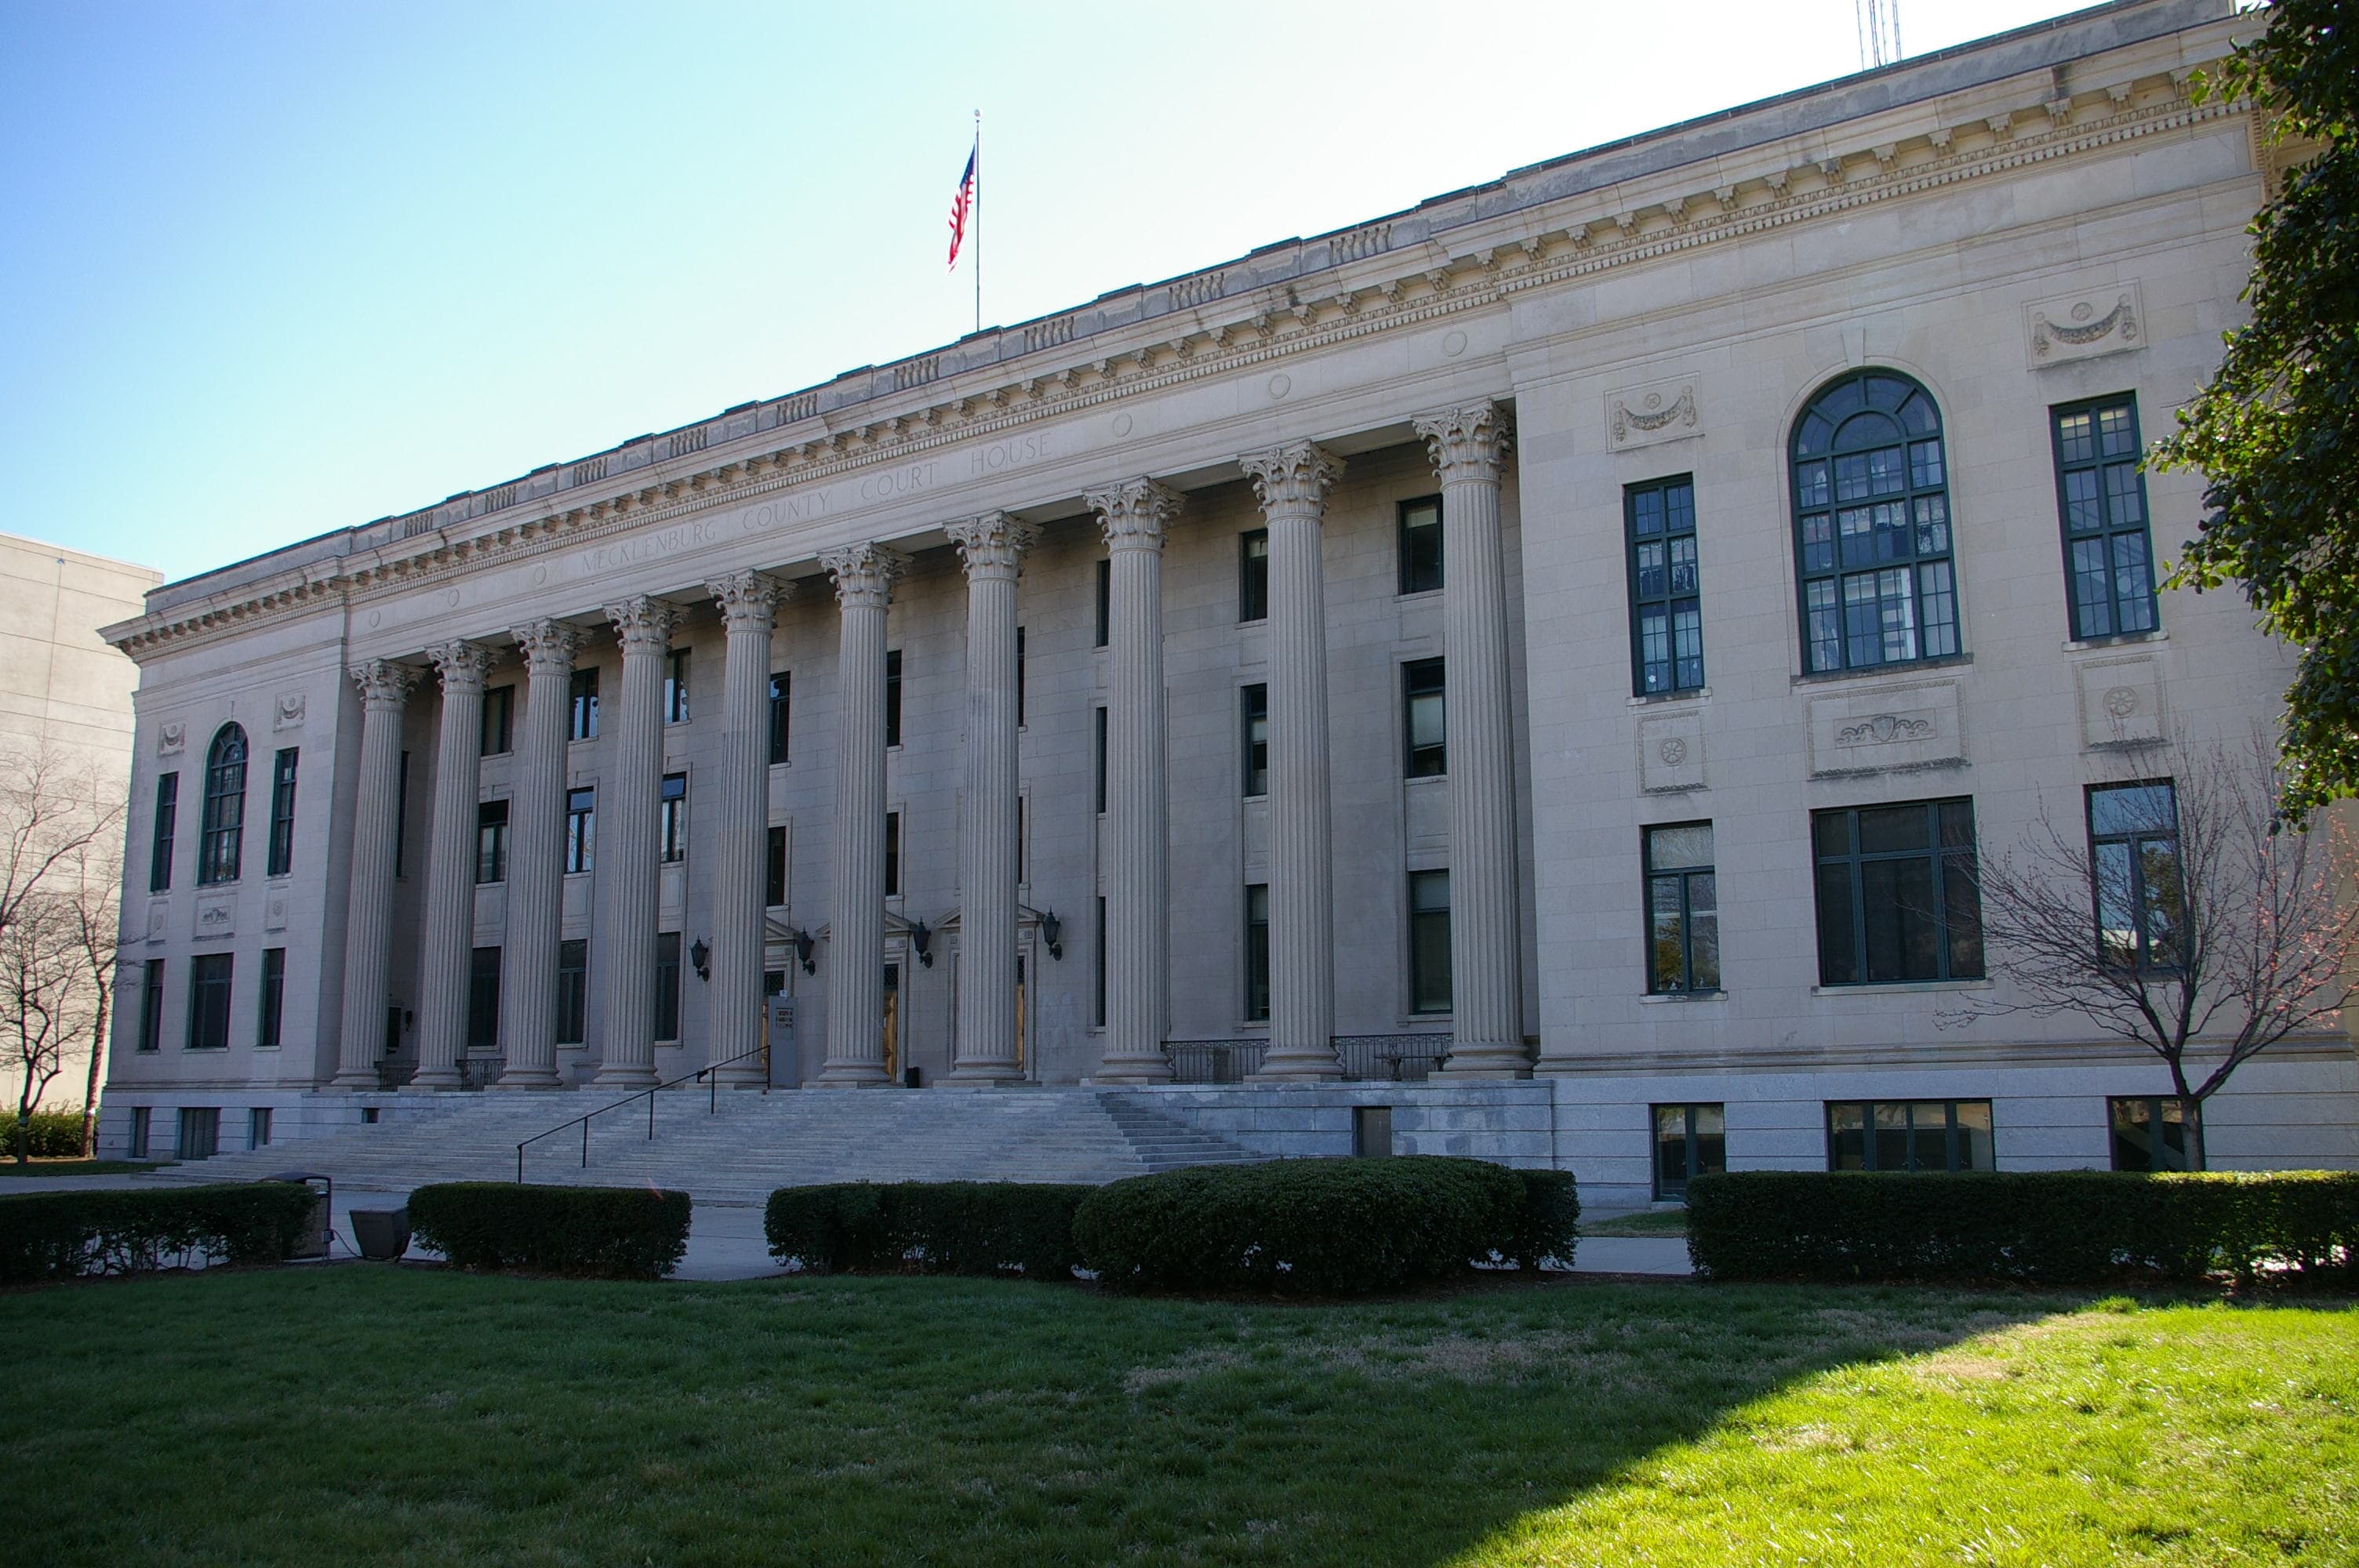 Mecklenburg County Courthouse